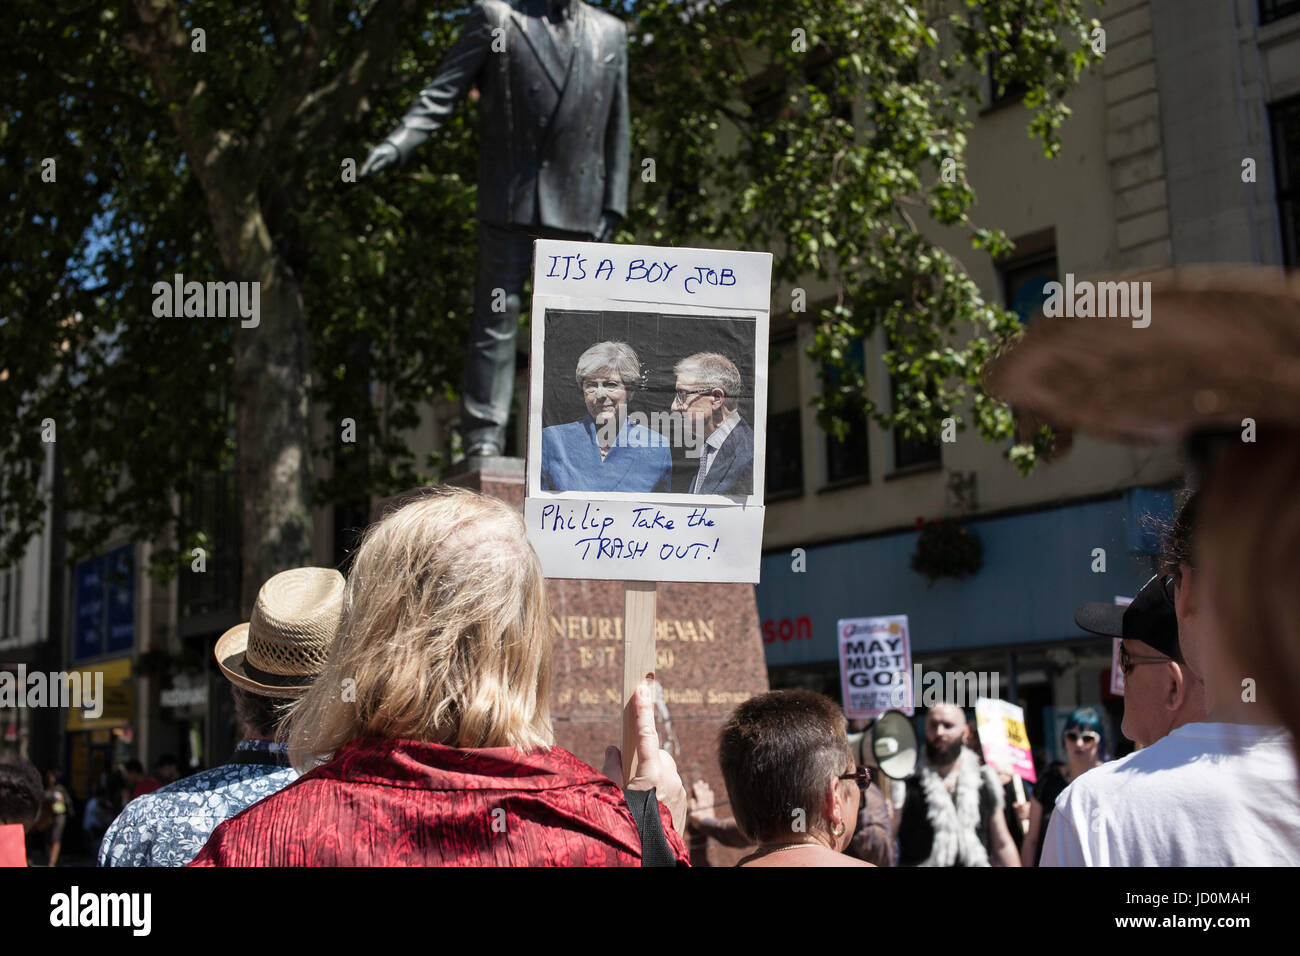 Cardiff, UK. 17th JUne, 2017. Campaigners gather under the Aneurin Bevan statue in Cardiff city centre to demand the resignation of Conservative Theresa May and protest against the deal with the Democratic Unionist Party from Northern Ireland. Taz Rahman/Alamy Live News Stock Photo